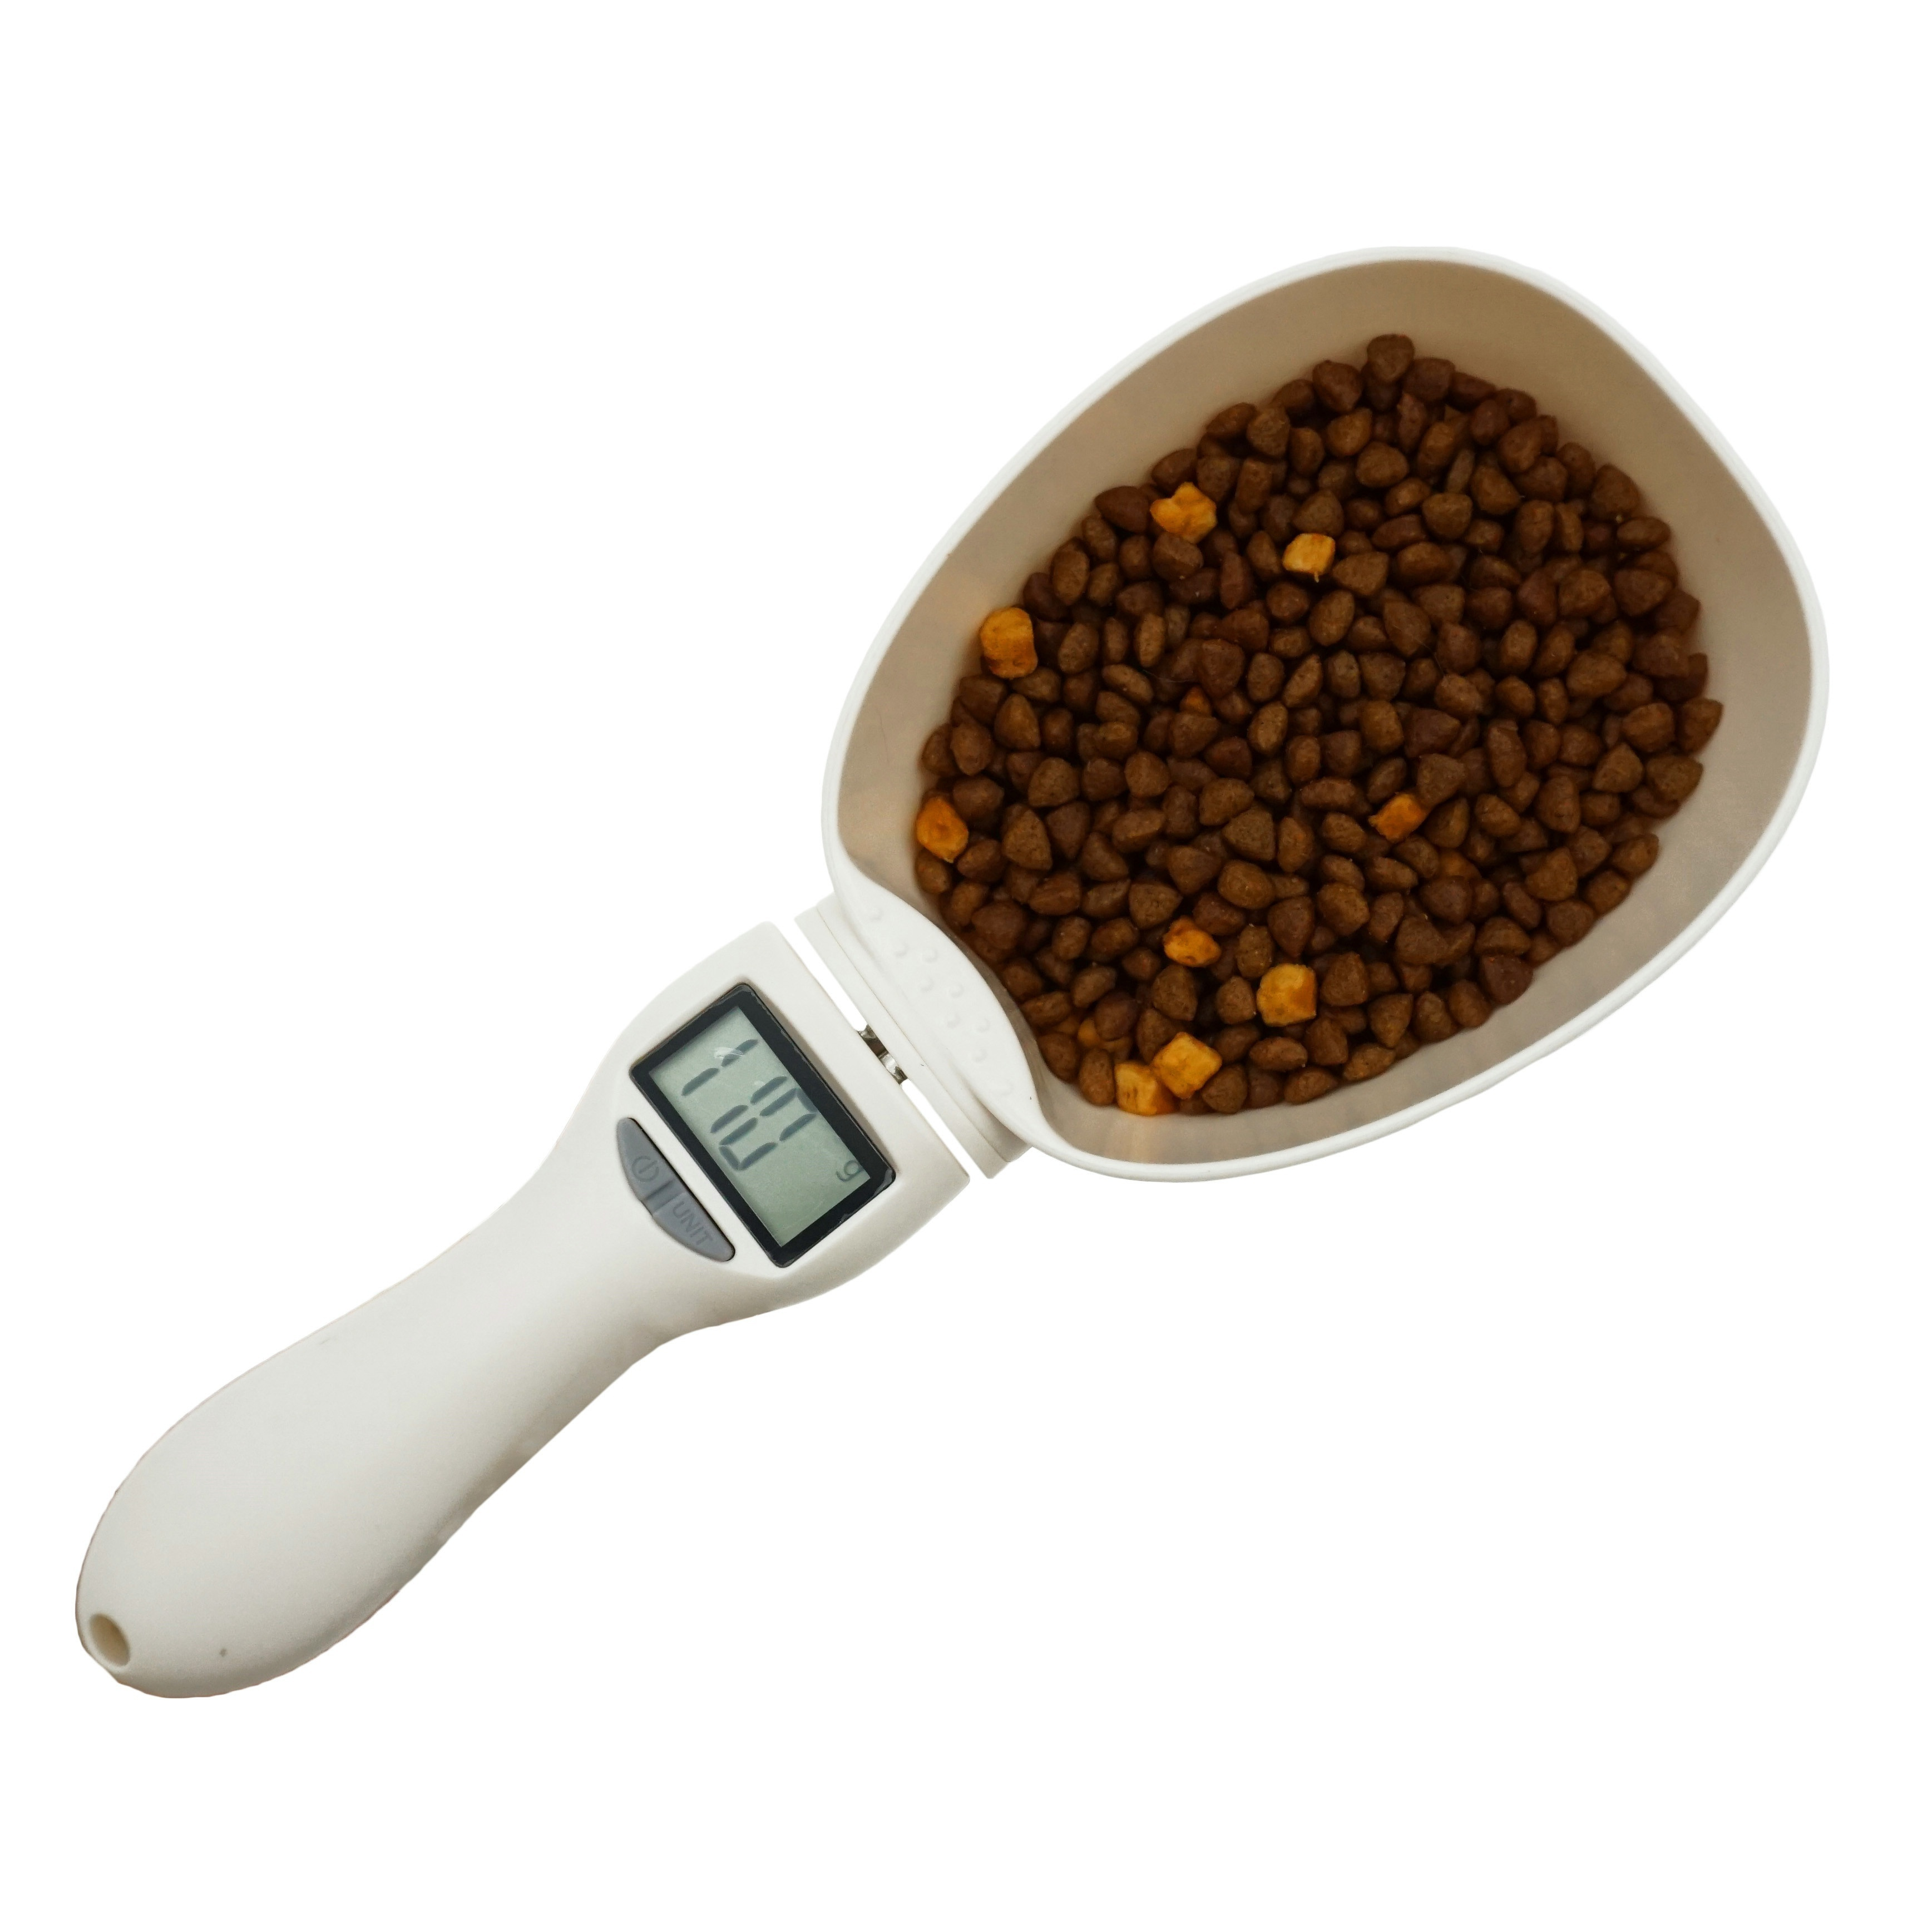 10kg/1g Digital Small Pet Weight Scale For Cats Dogs Measure Tool